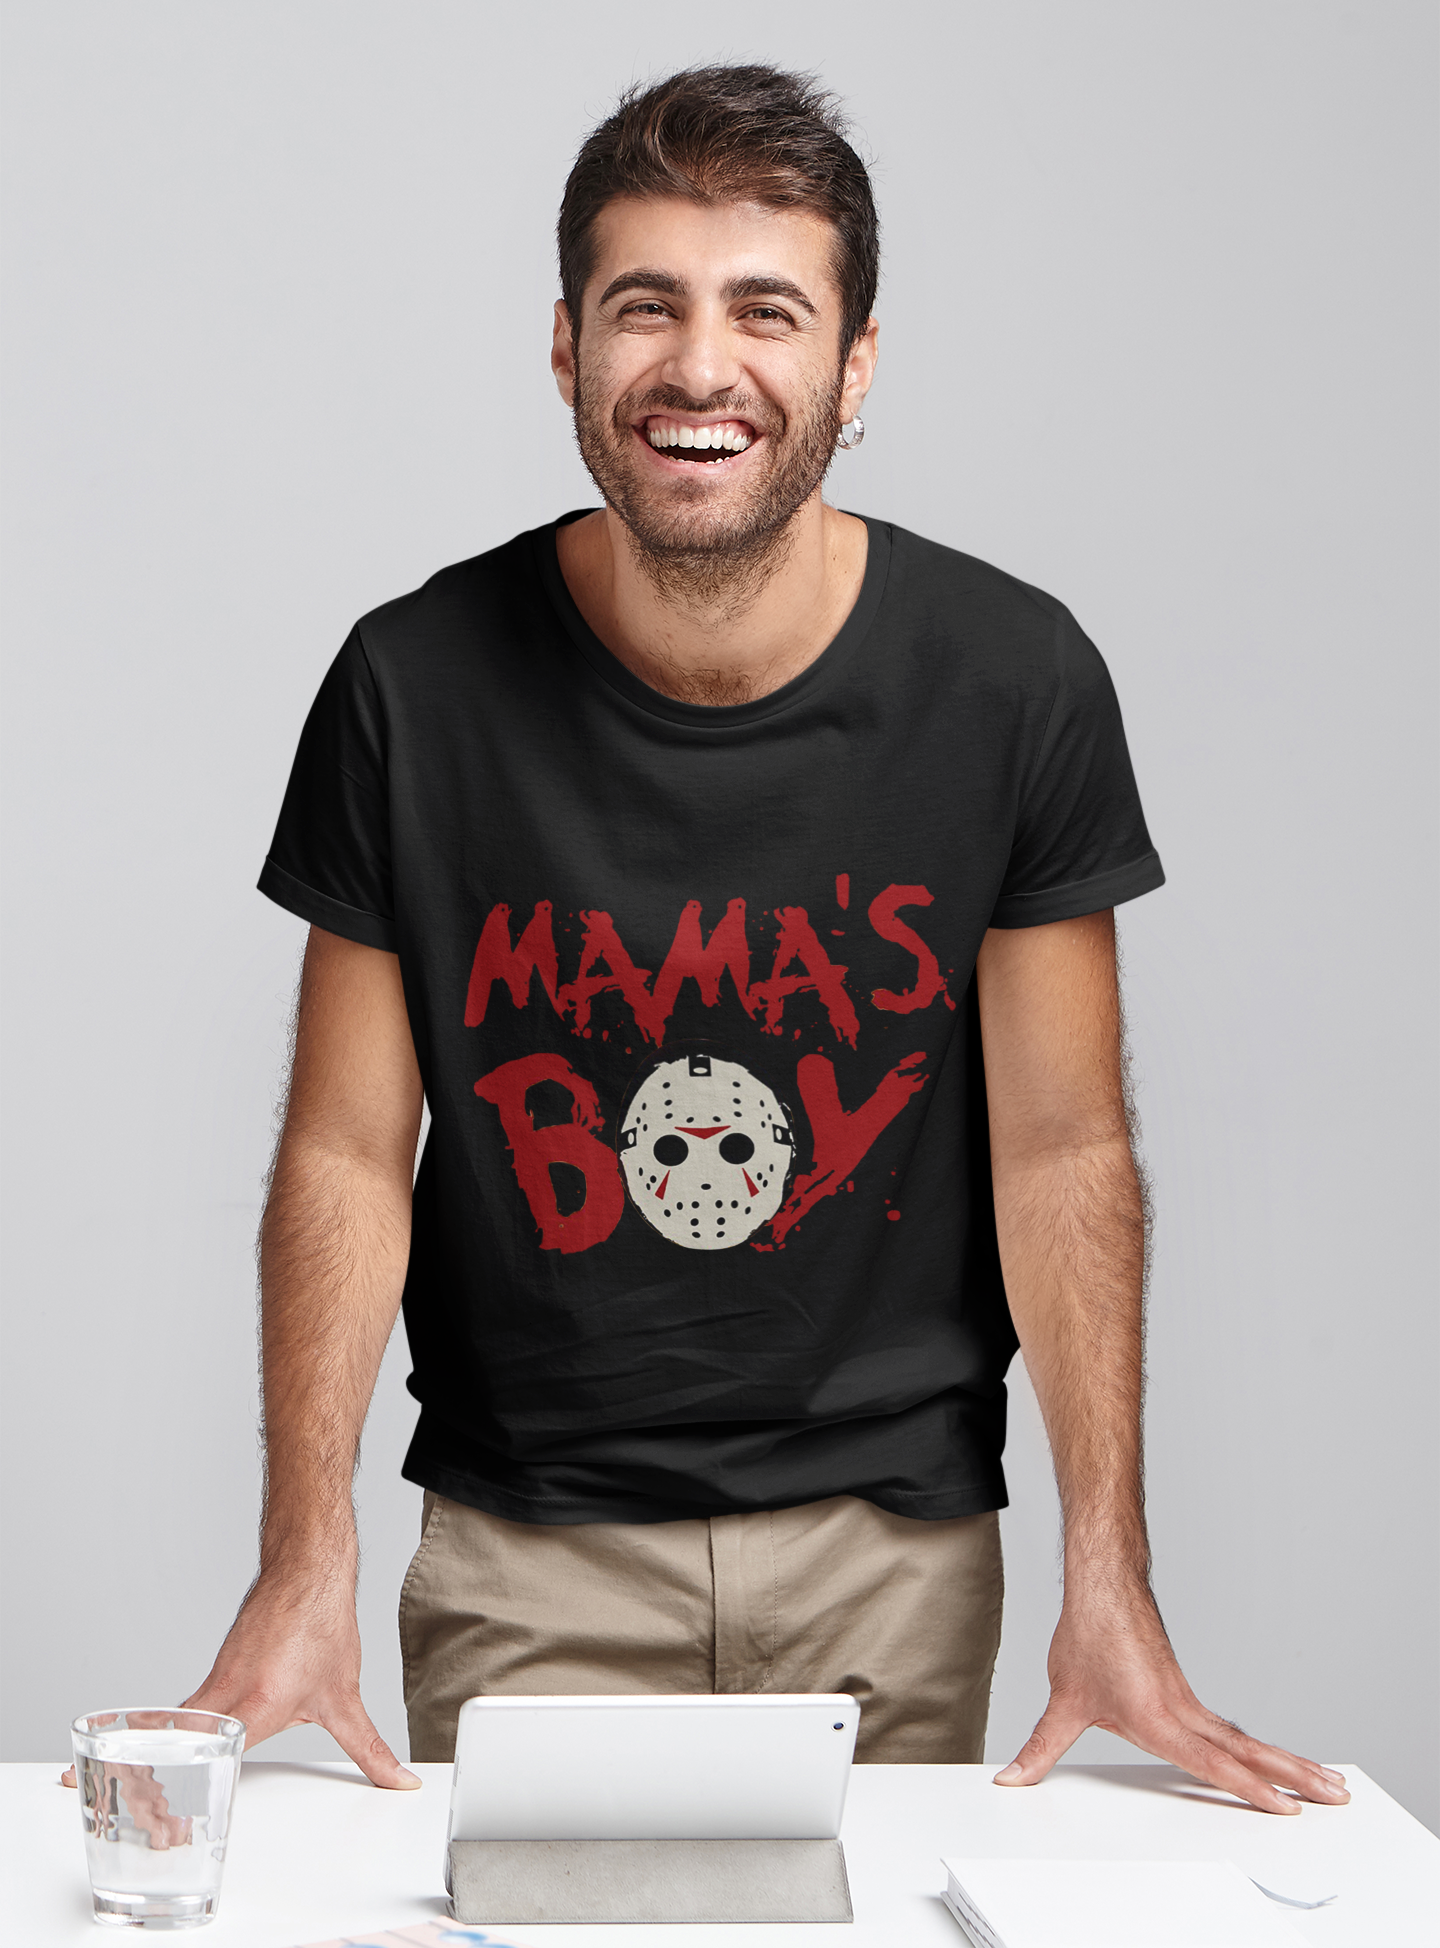 Friday 13th T Shirt, Mamas Boy Tshirt, Jason Voorhees Face T Shirt, Halloween Gifts, Mothers Day Gifts